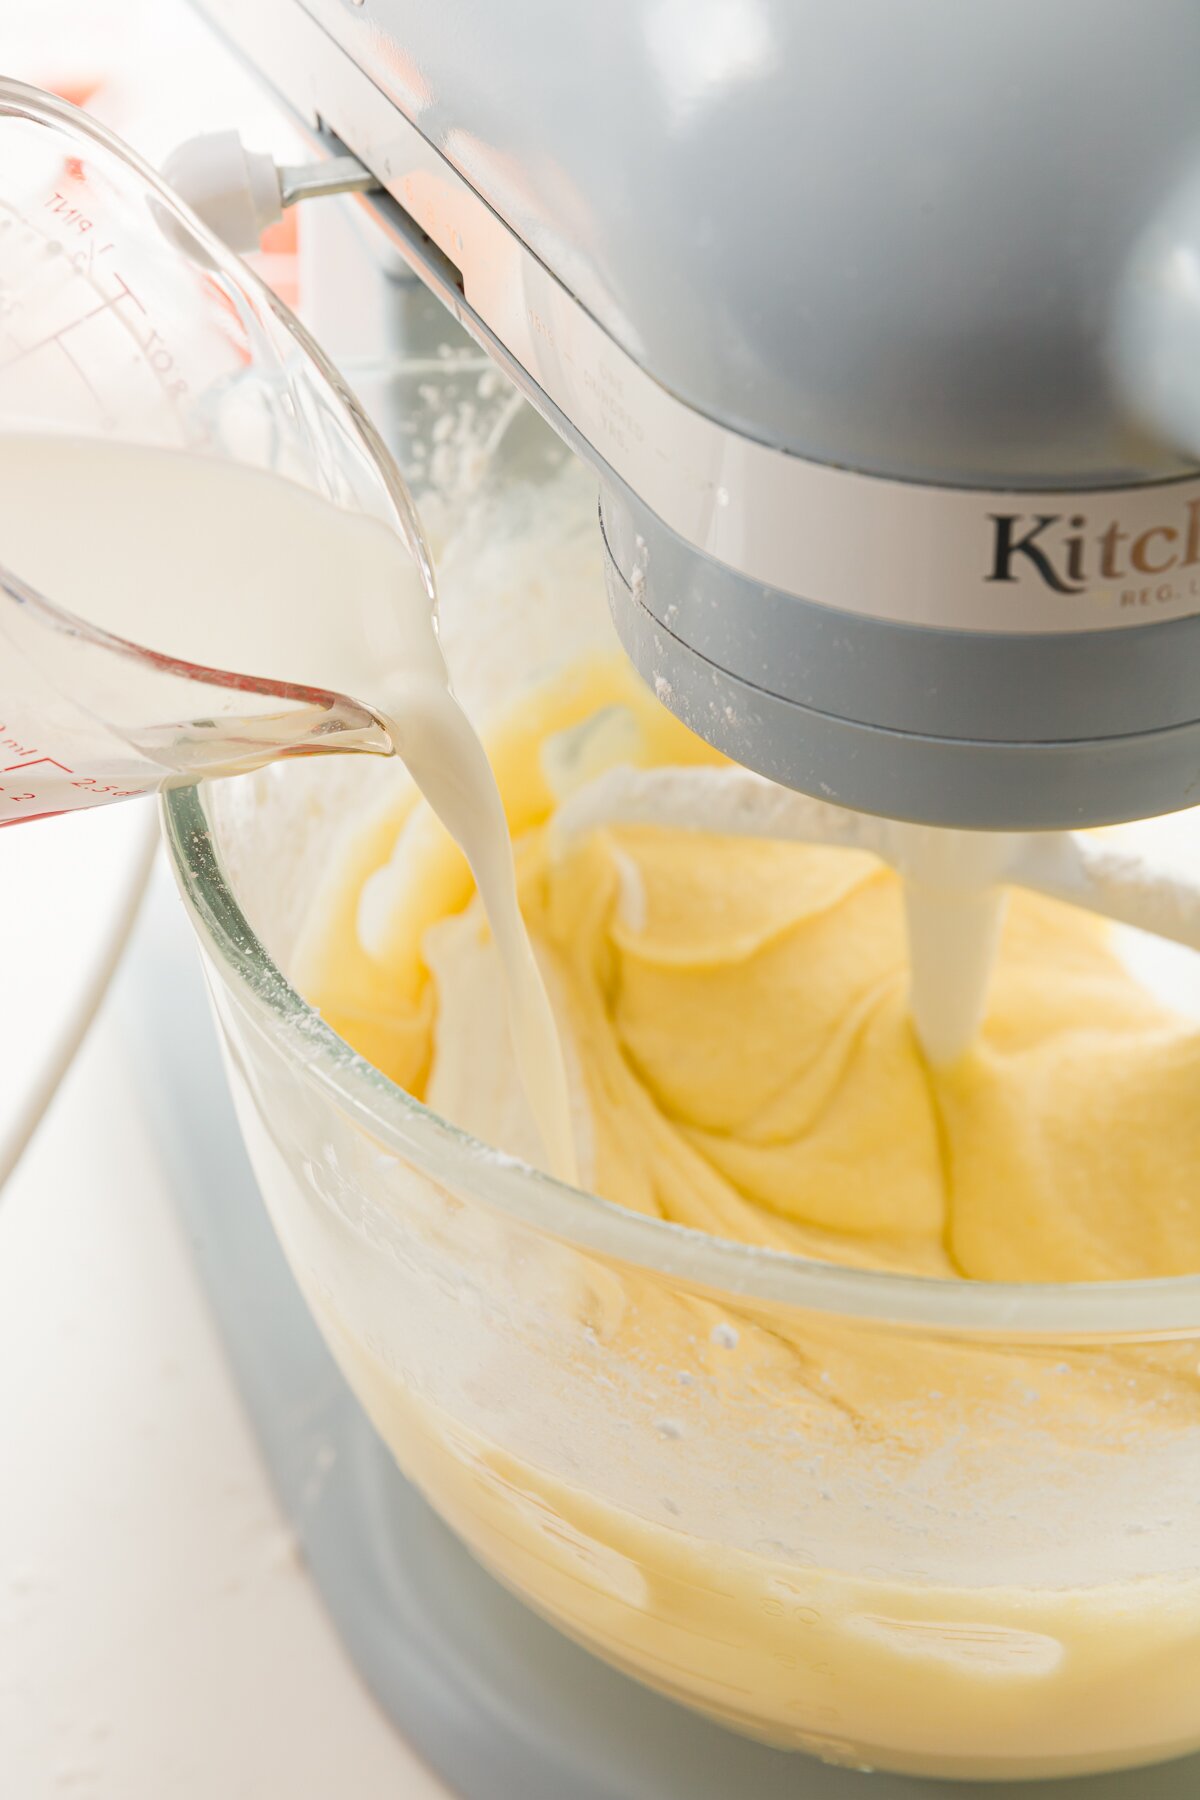 Pouring mixing into a kitchenaid mixer bowl filled with smooth batter